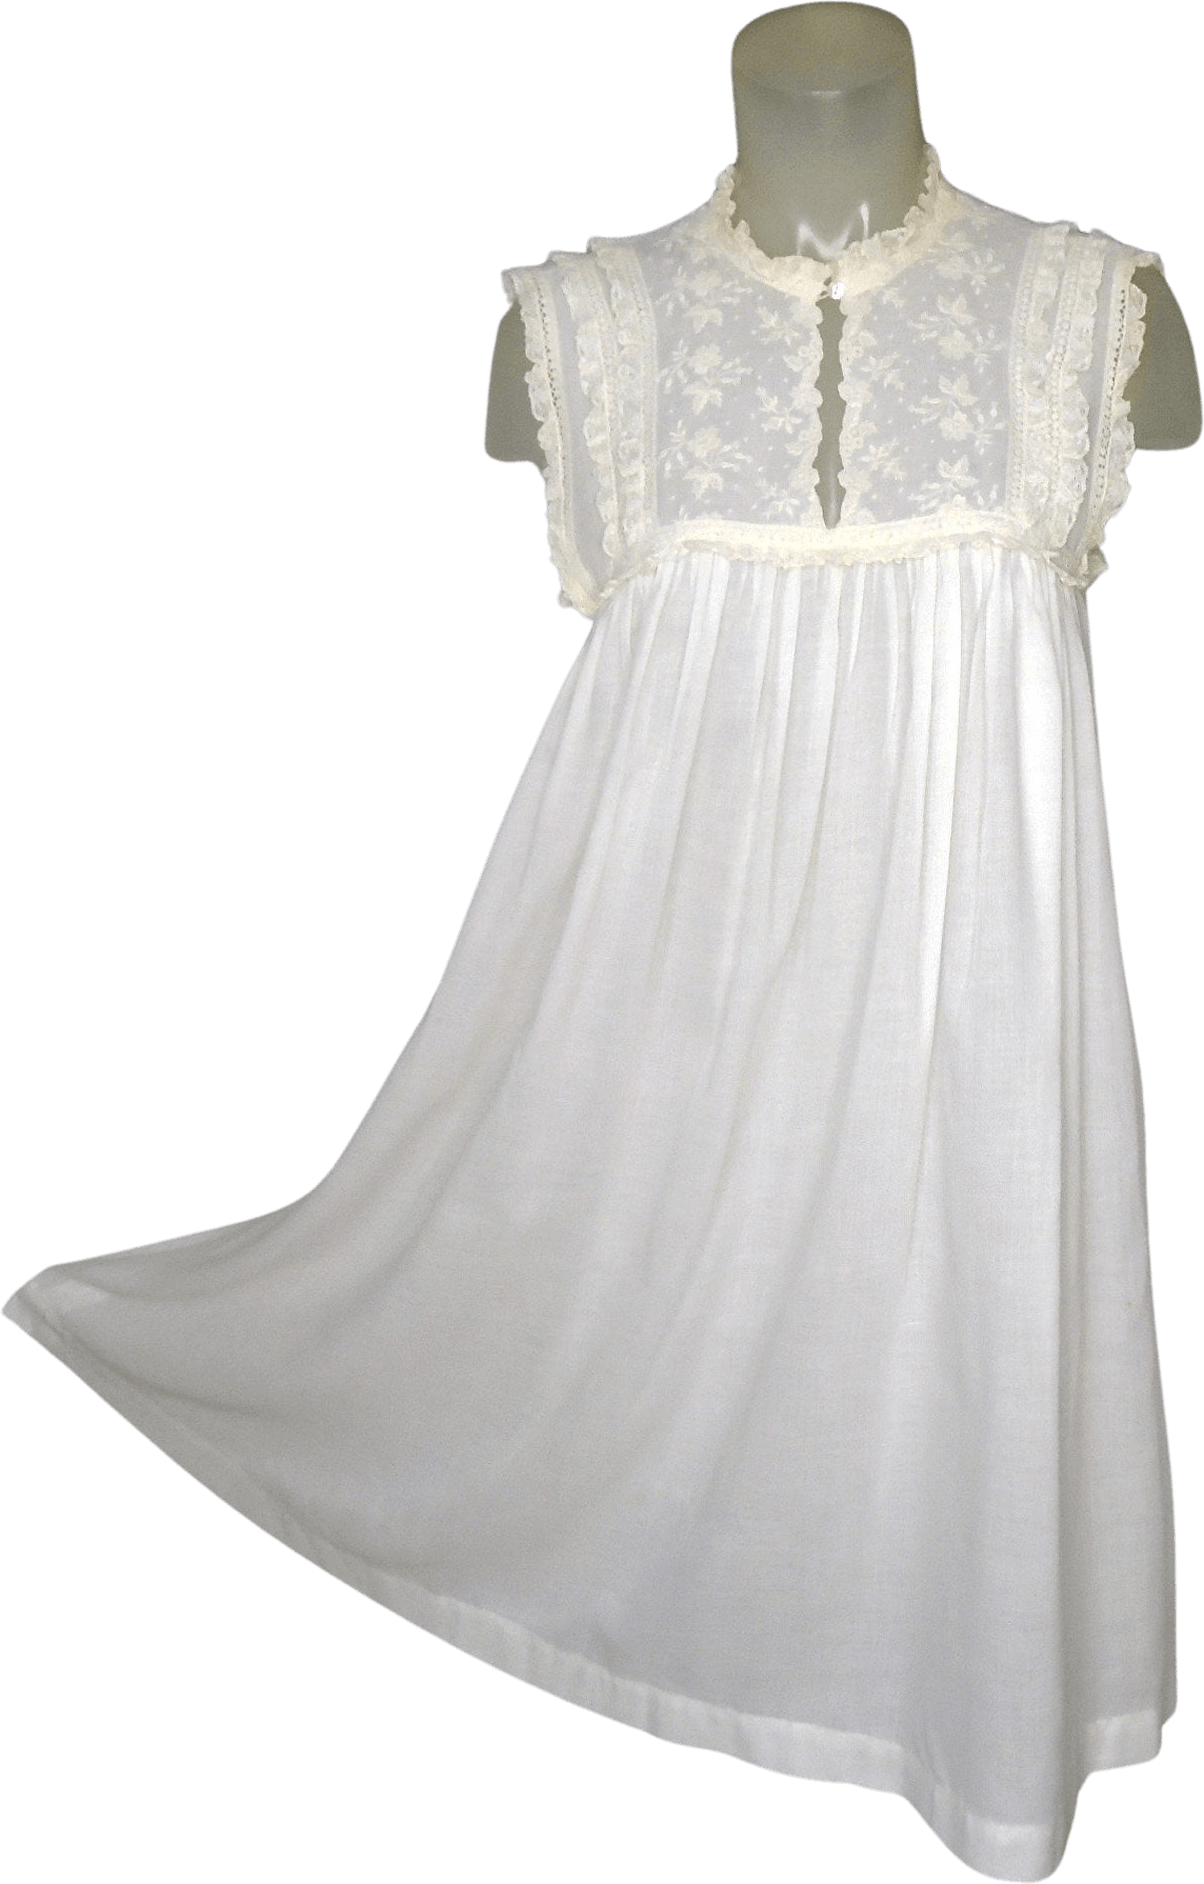 Vintage 70's Sheer Lace Ruffled Sleeveless White Nightgown by B. Altman ...